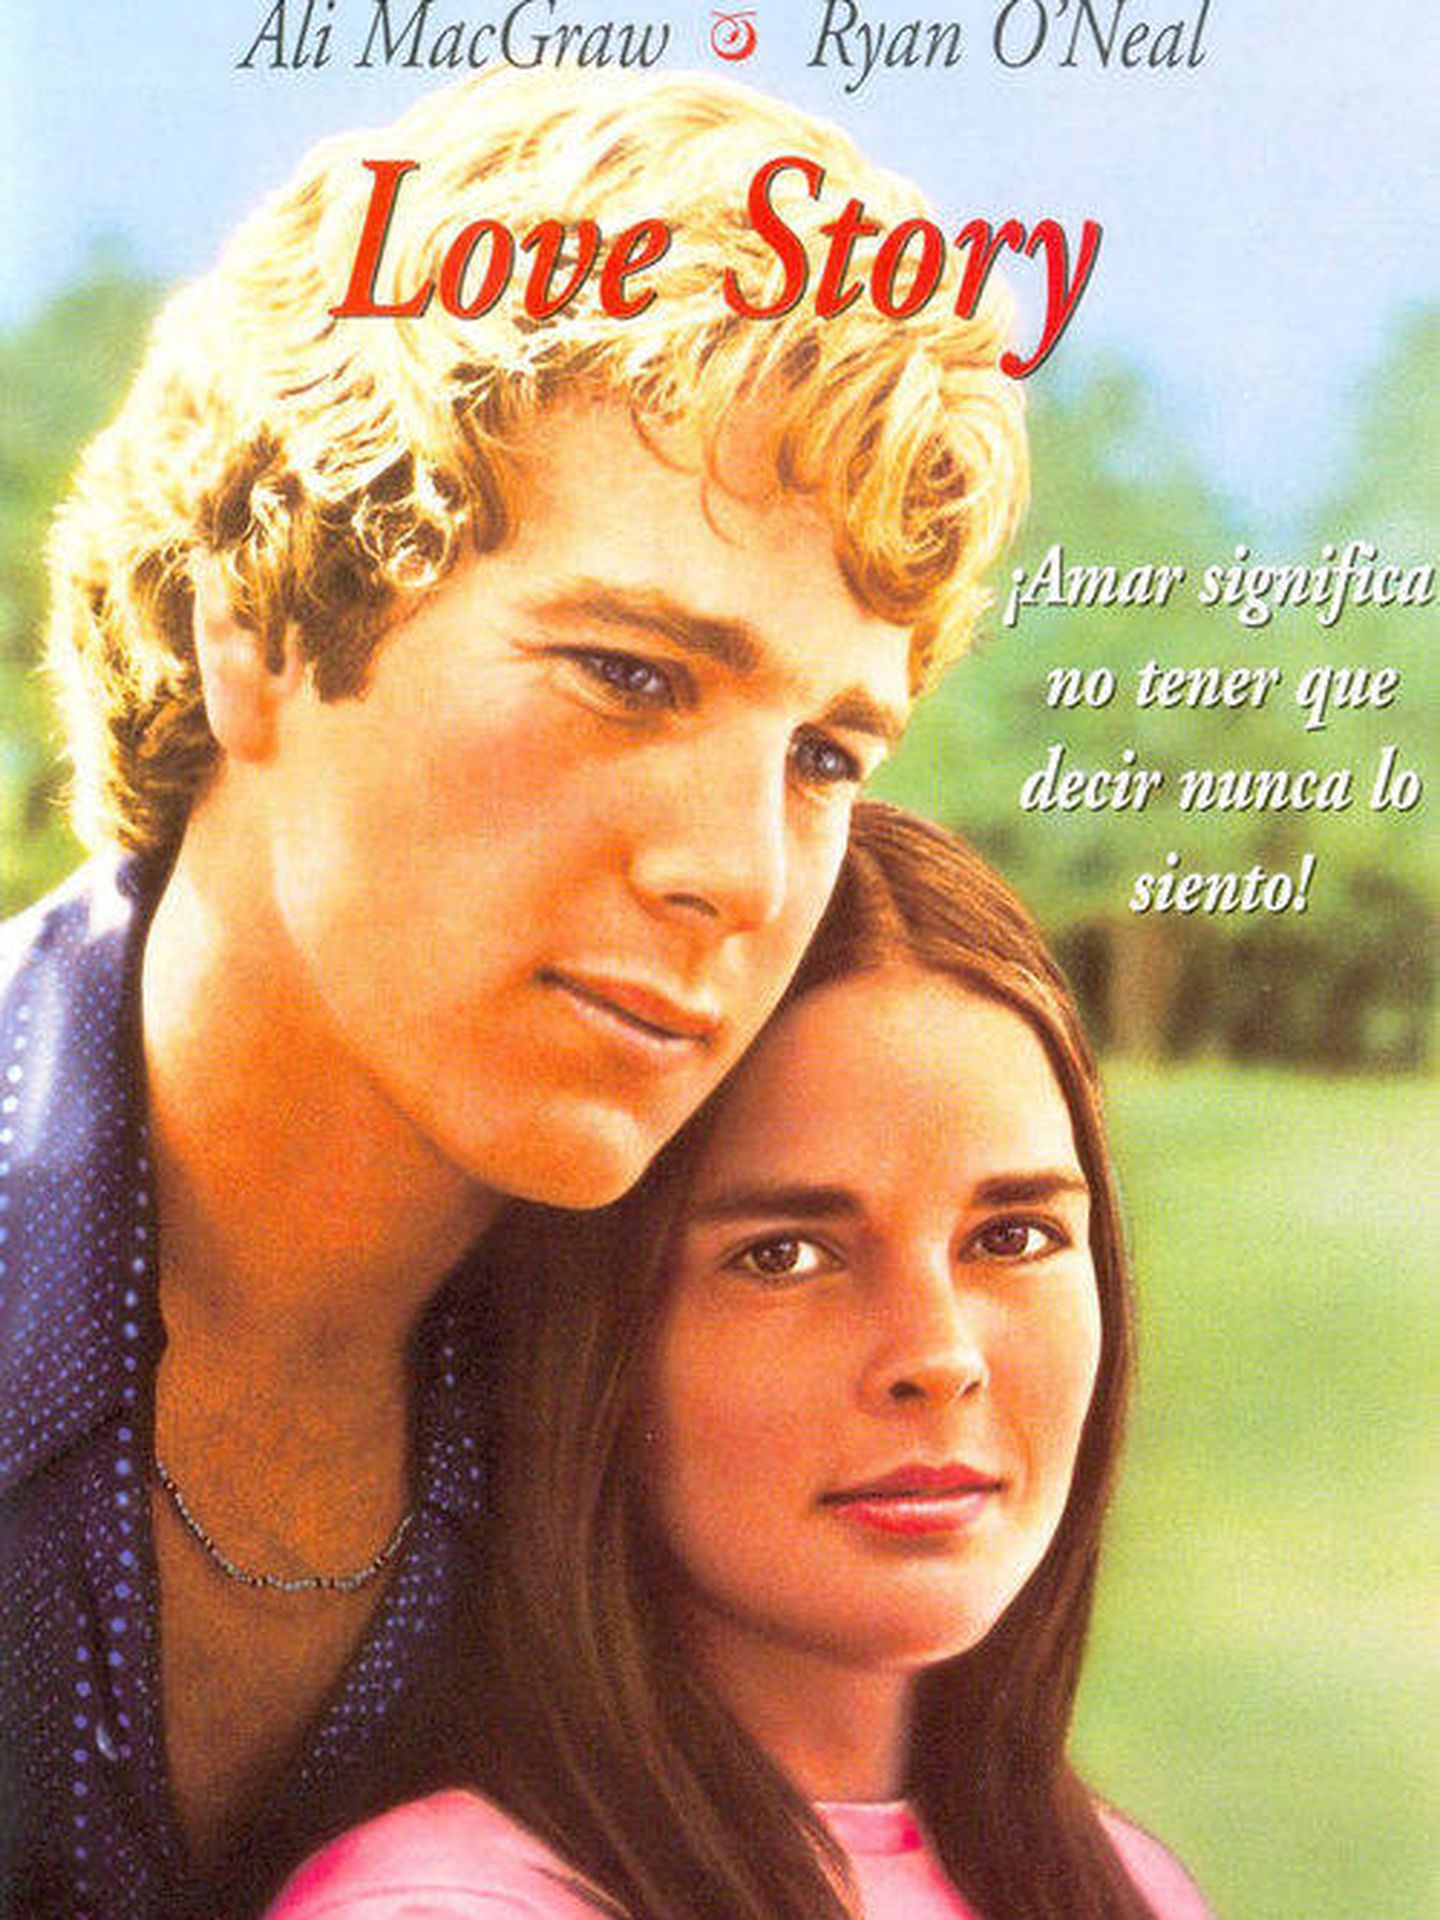 'Love story' (Paramount Pictures)